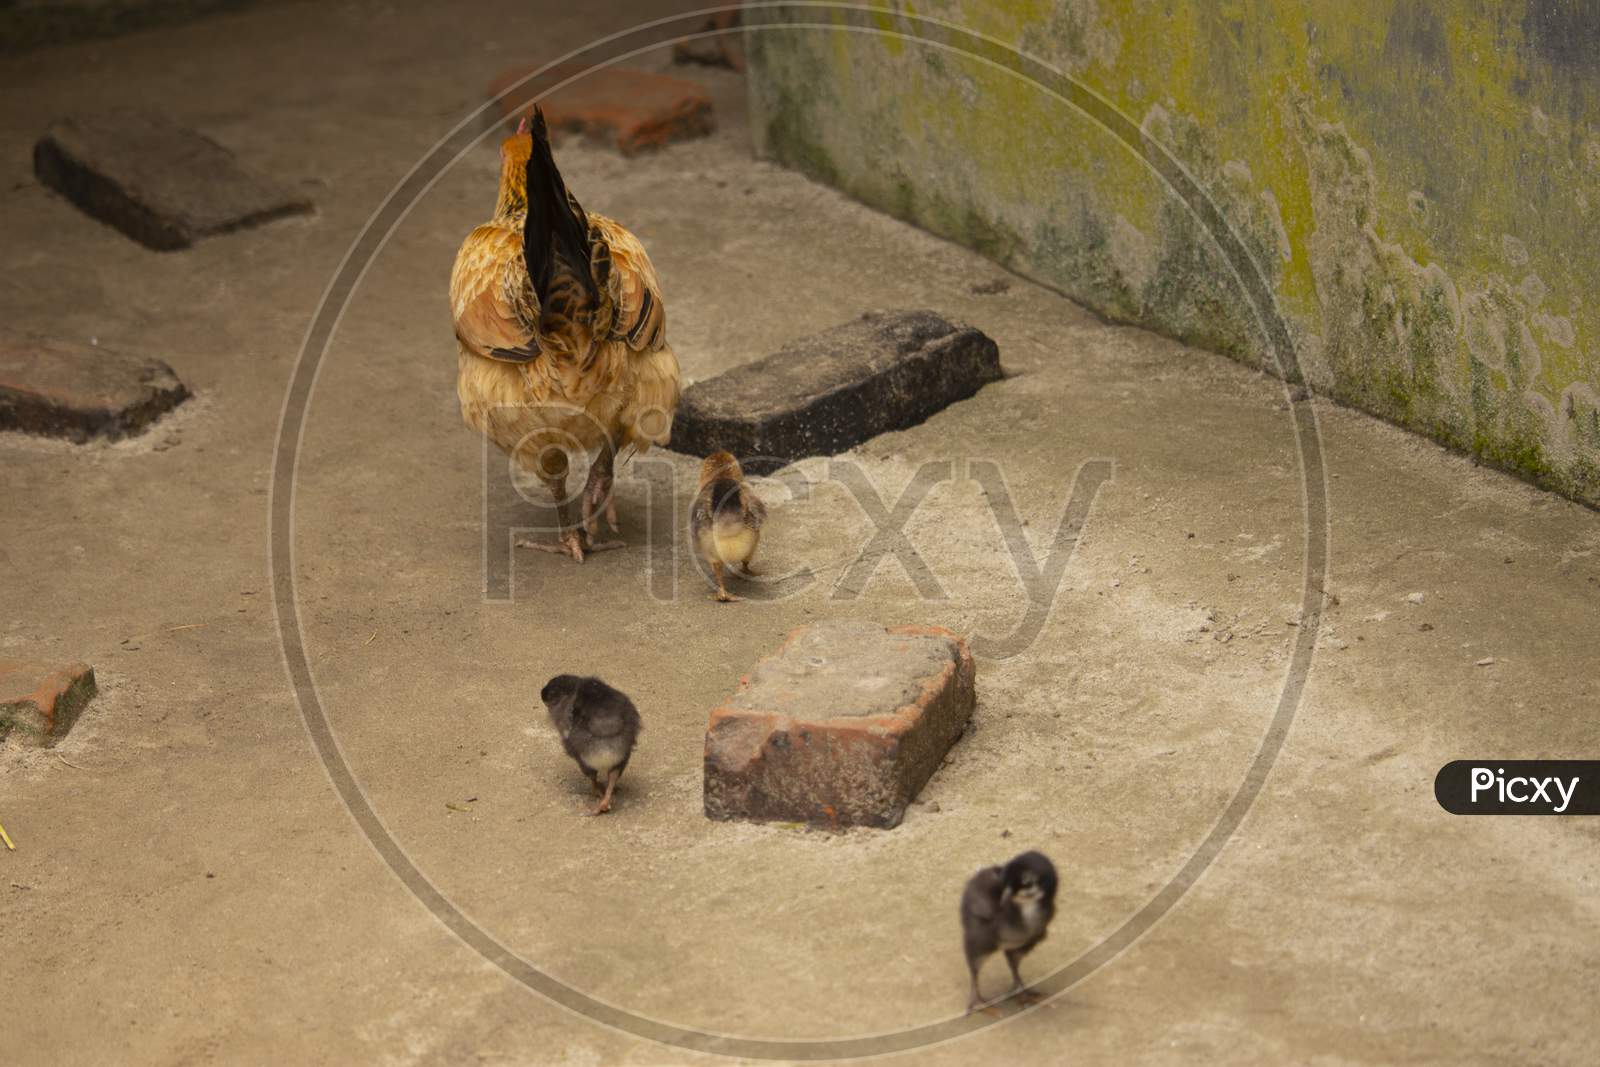 Speckled Hen With Baby Chicken. Chicken With Chicks Home Firm In Village. Hen Finding Food With Chicks In Outdoor. Brown,White And Black Mixed Color Hen.Grey Fluffy Mother Hen With Offspring Chickens.